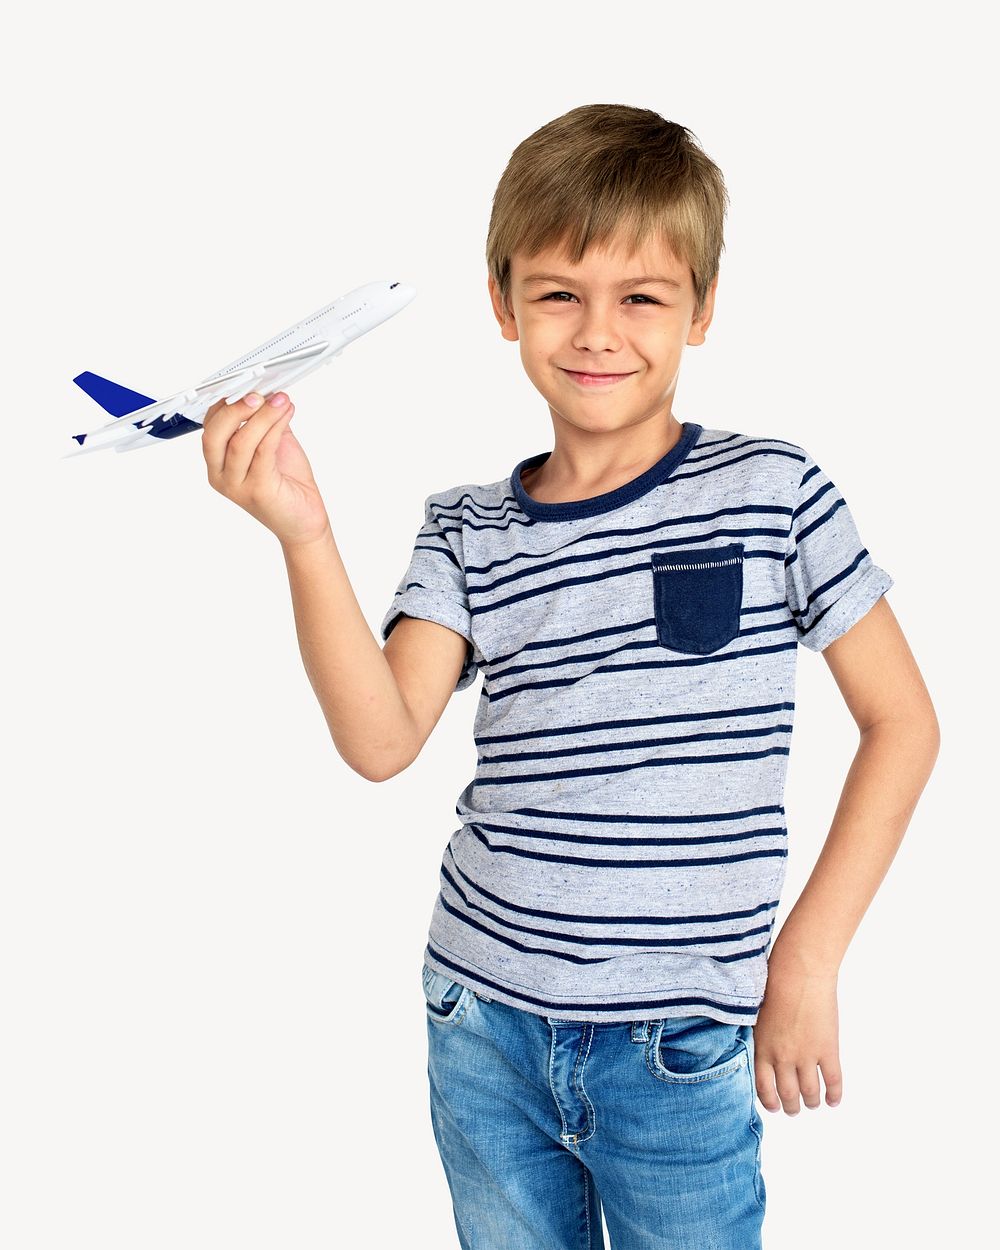 Boy with toy airplane image element